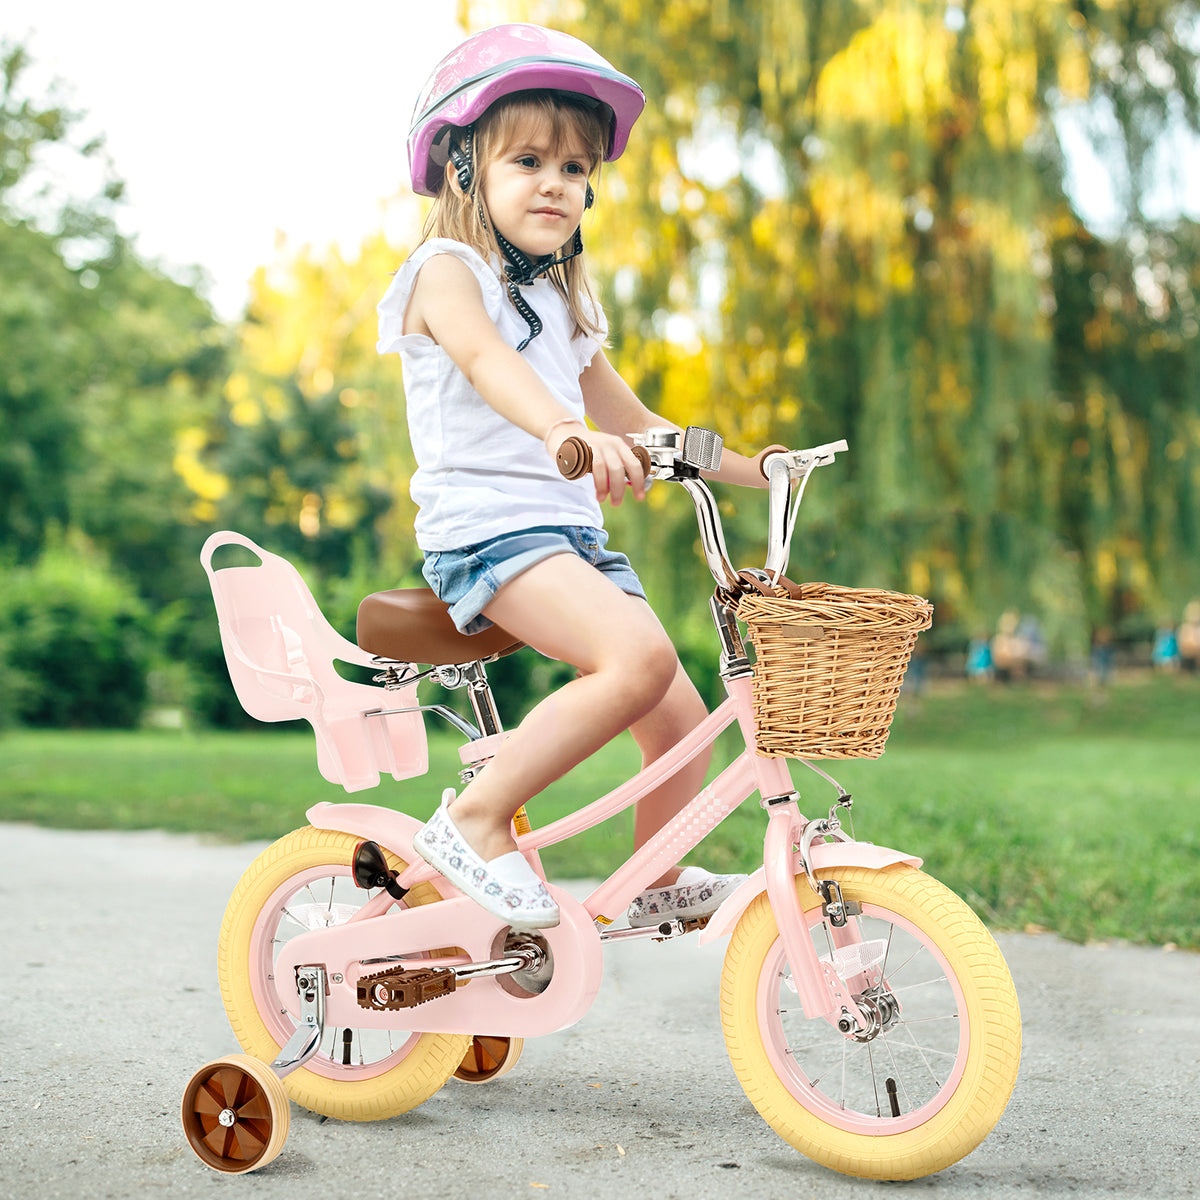 XJD Kids Bicycle for Toddlers and Children 2-12 Years Old, 12 14 16 20 inch Bike for Girls and Boys, with Basket and Bell Training Wheels, Adjustable Seat Handlebar Height, Pink